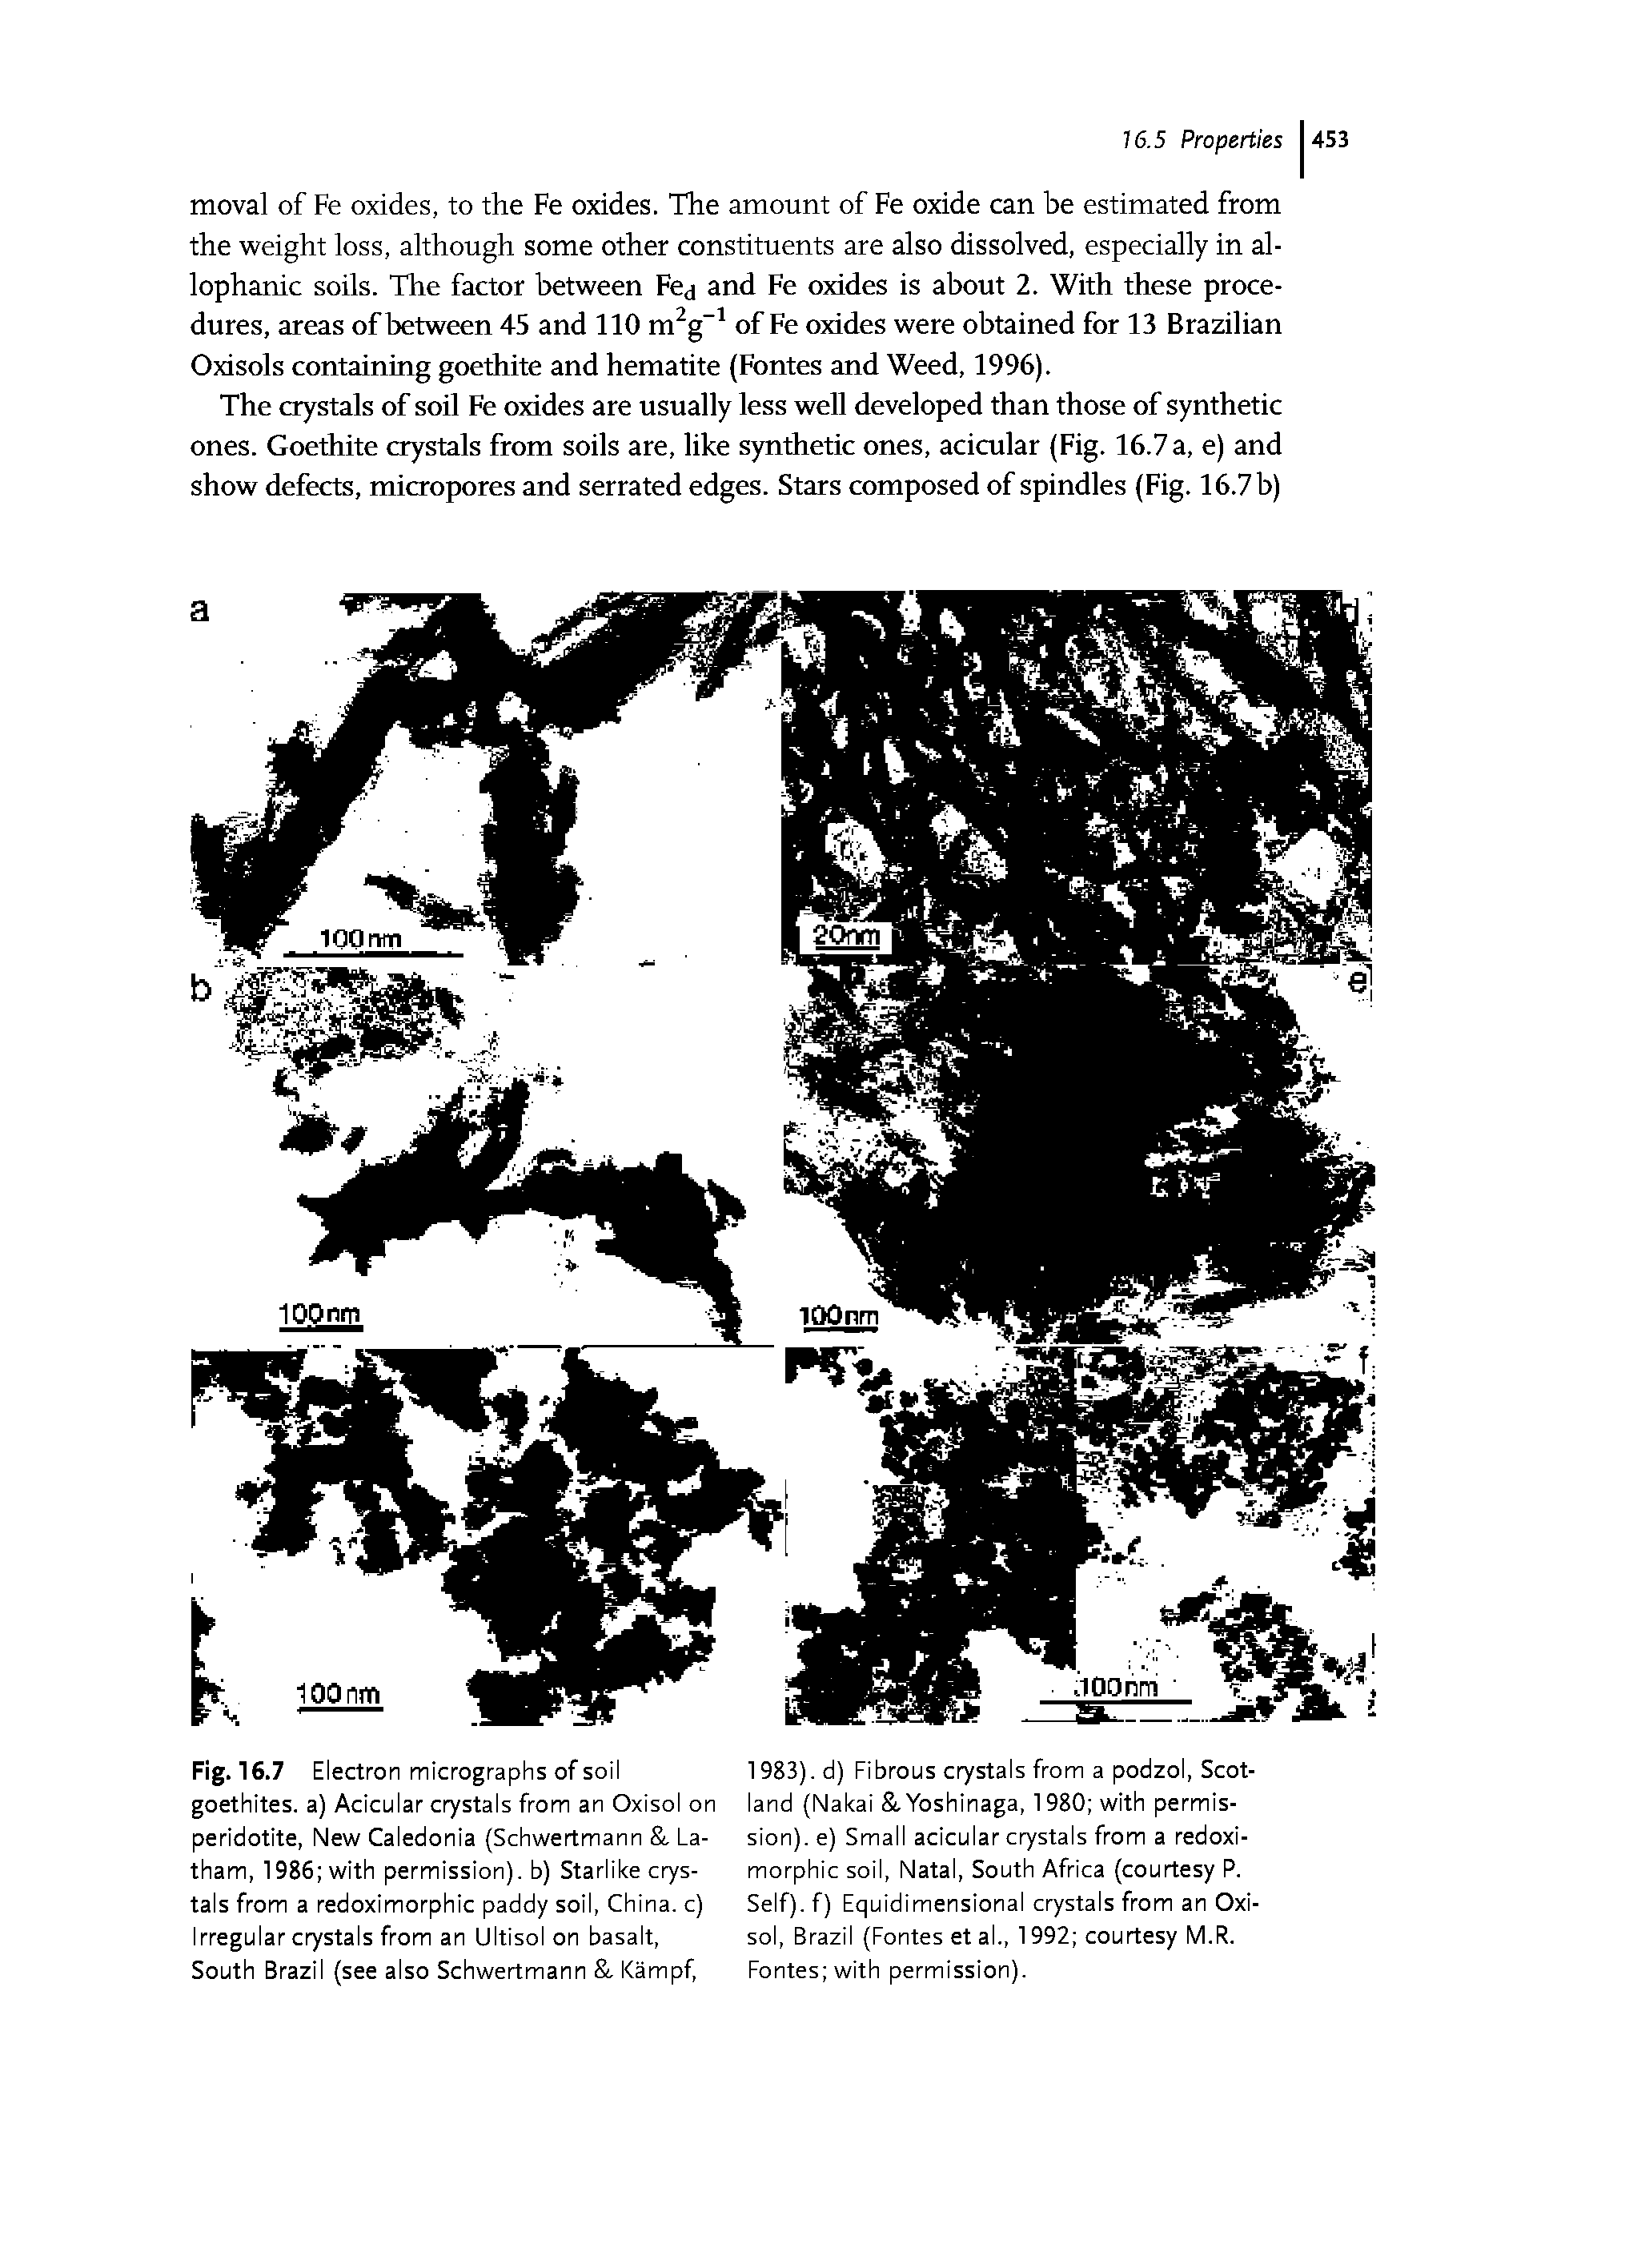 Fig. 16.7 Electron micrographs of soil goethites. a) Acicular crystals from an Oxisol on peridotite. New Caledonia (Schwertmann, Latham, 1986 with permission), b) Starlike crystals from a redoximorphic paddy soil, China, c) Irregular crystals from an Ultisol on basalt, South Brazil (see also Schwertmann, Kampf,...